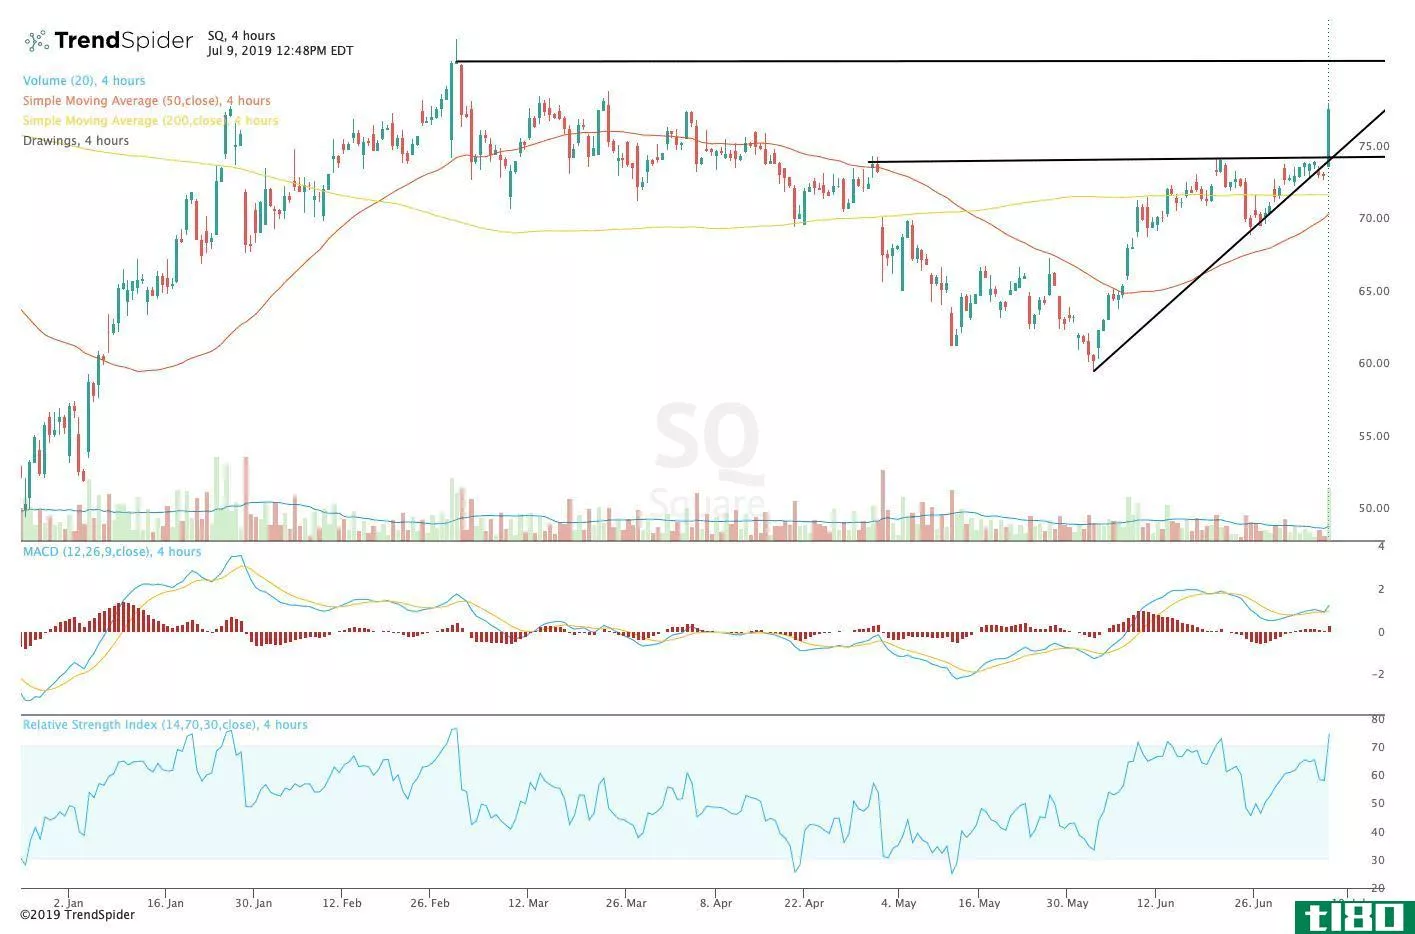 Chart showing the share price performance of Square, Inc. (SQ)